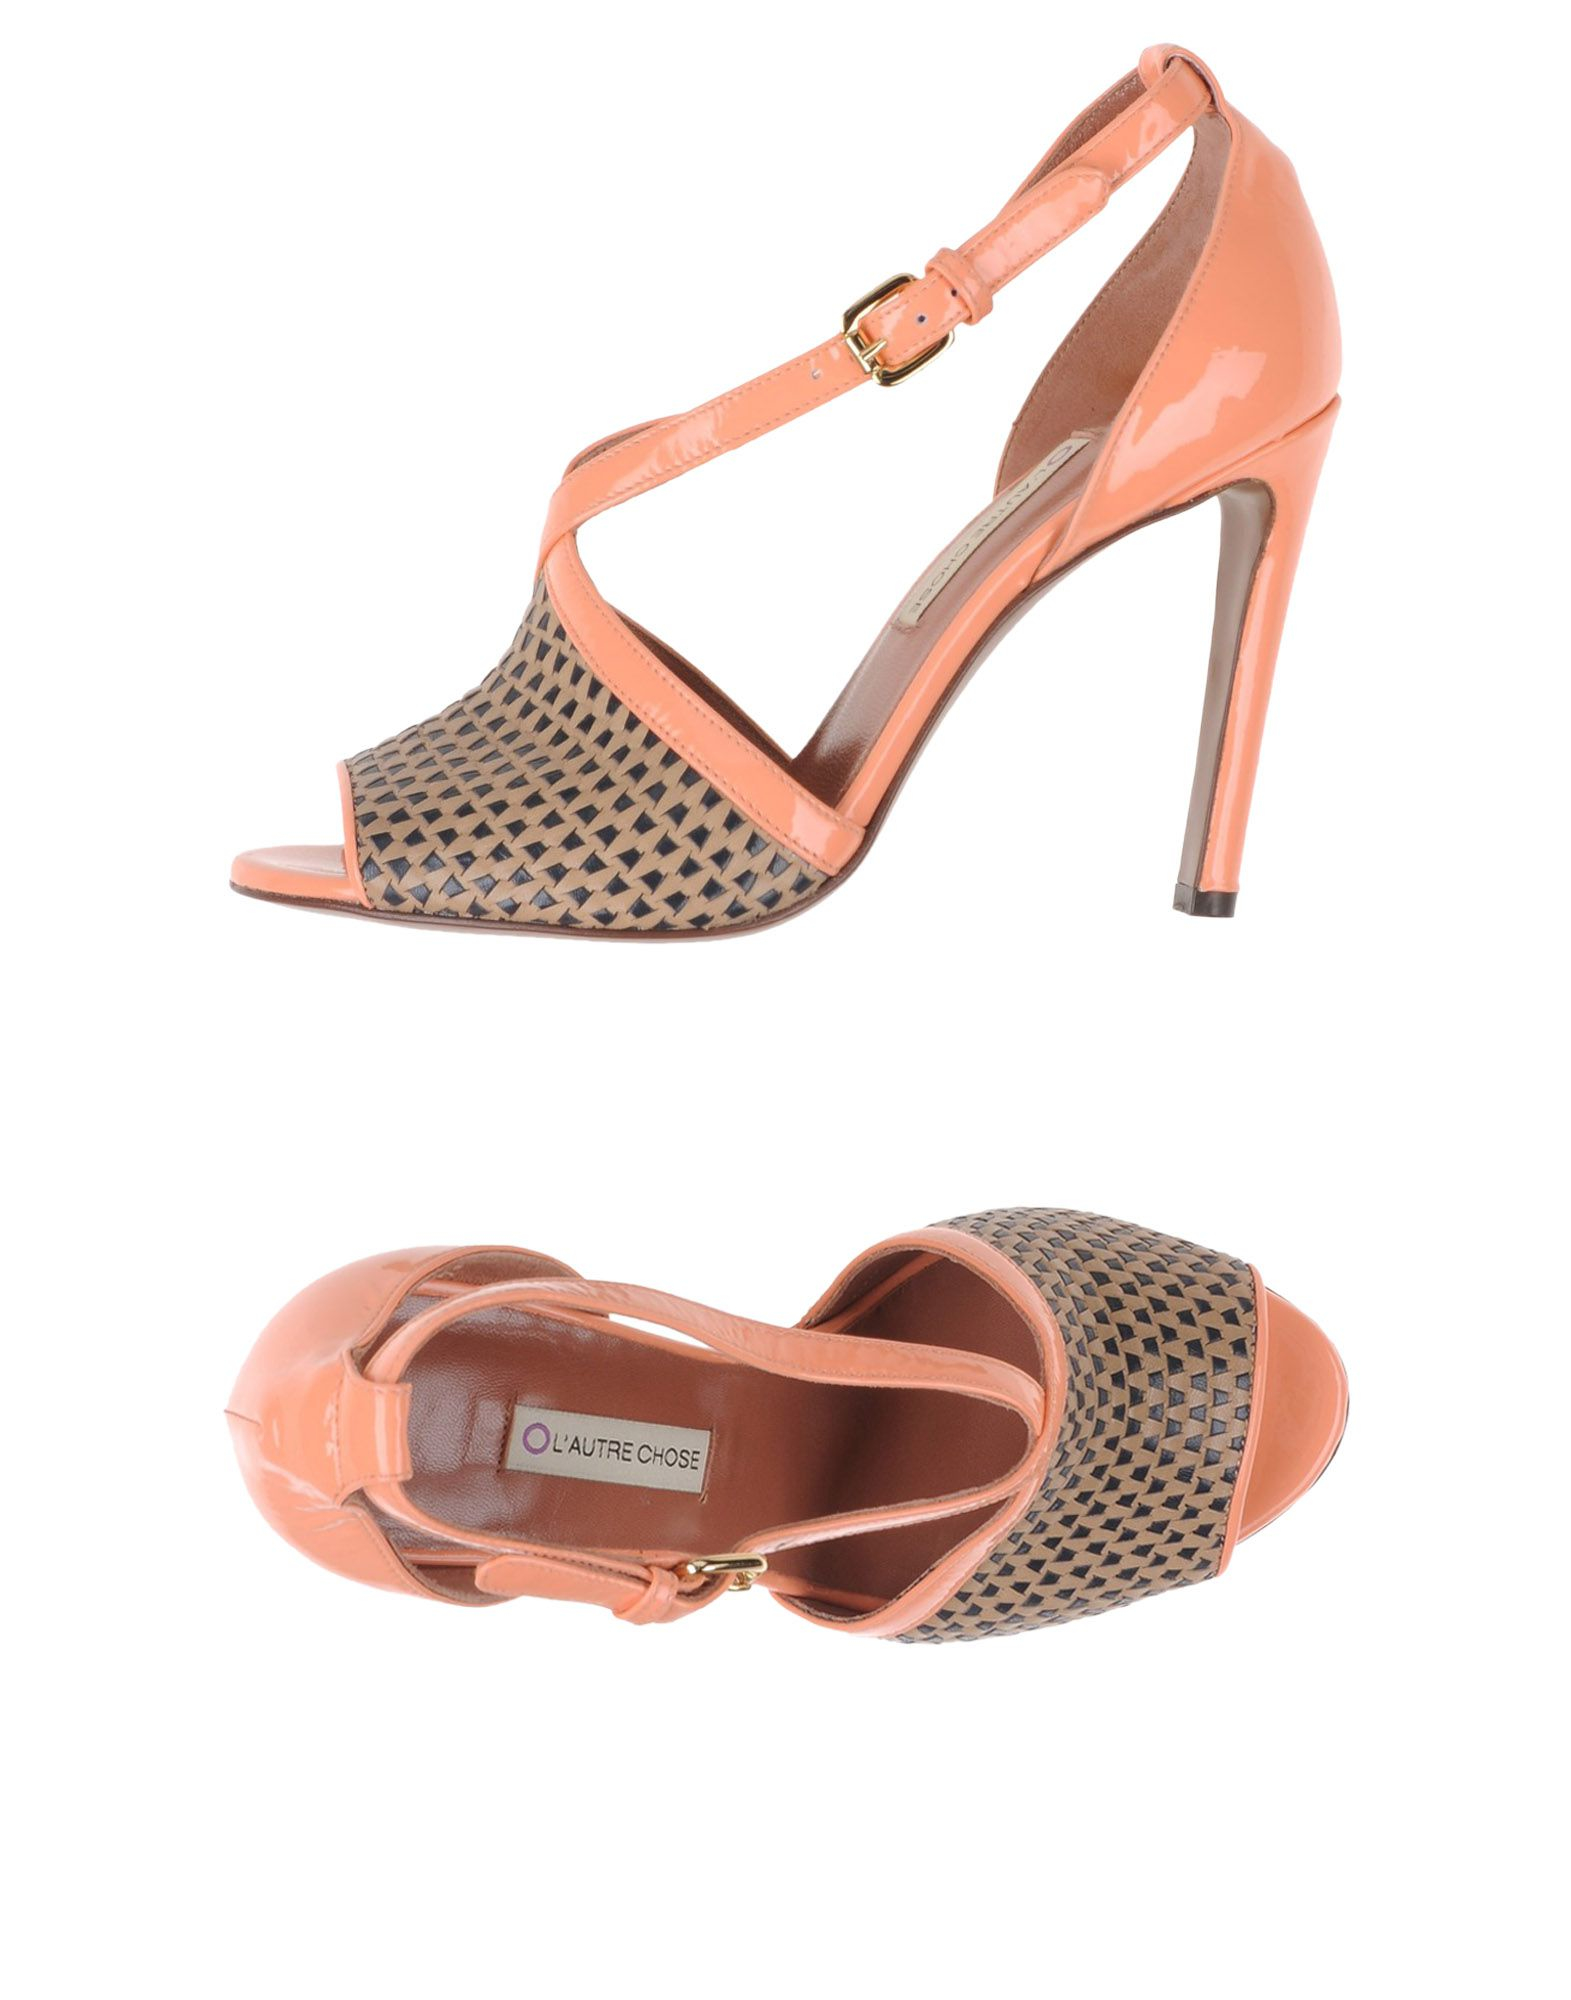 L'autre chose Sandals in Pink (Salmon pink) - Save 59% | Lyst